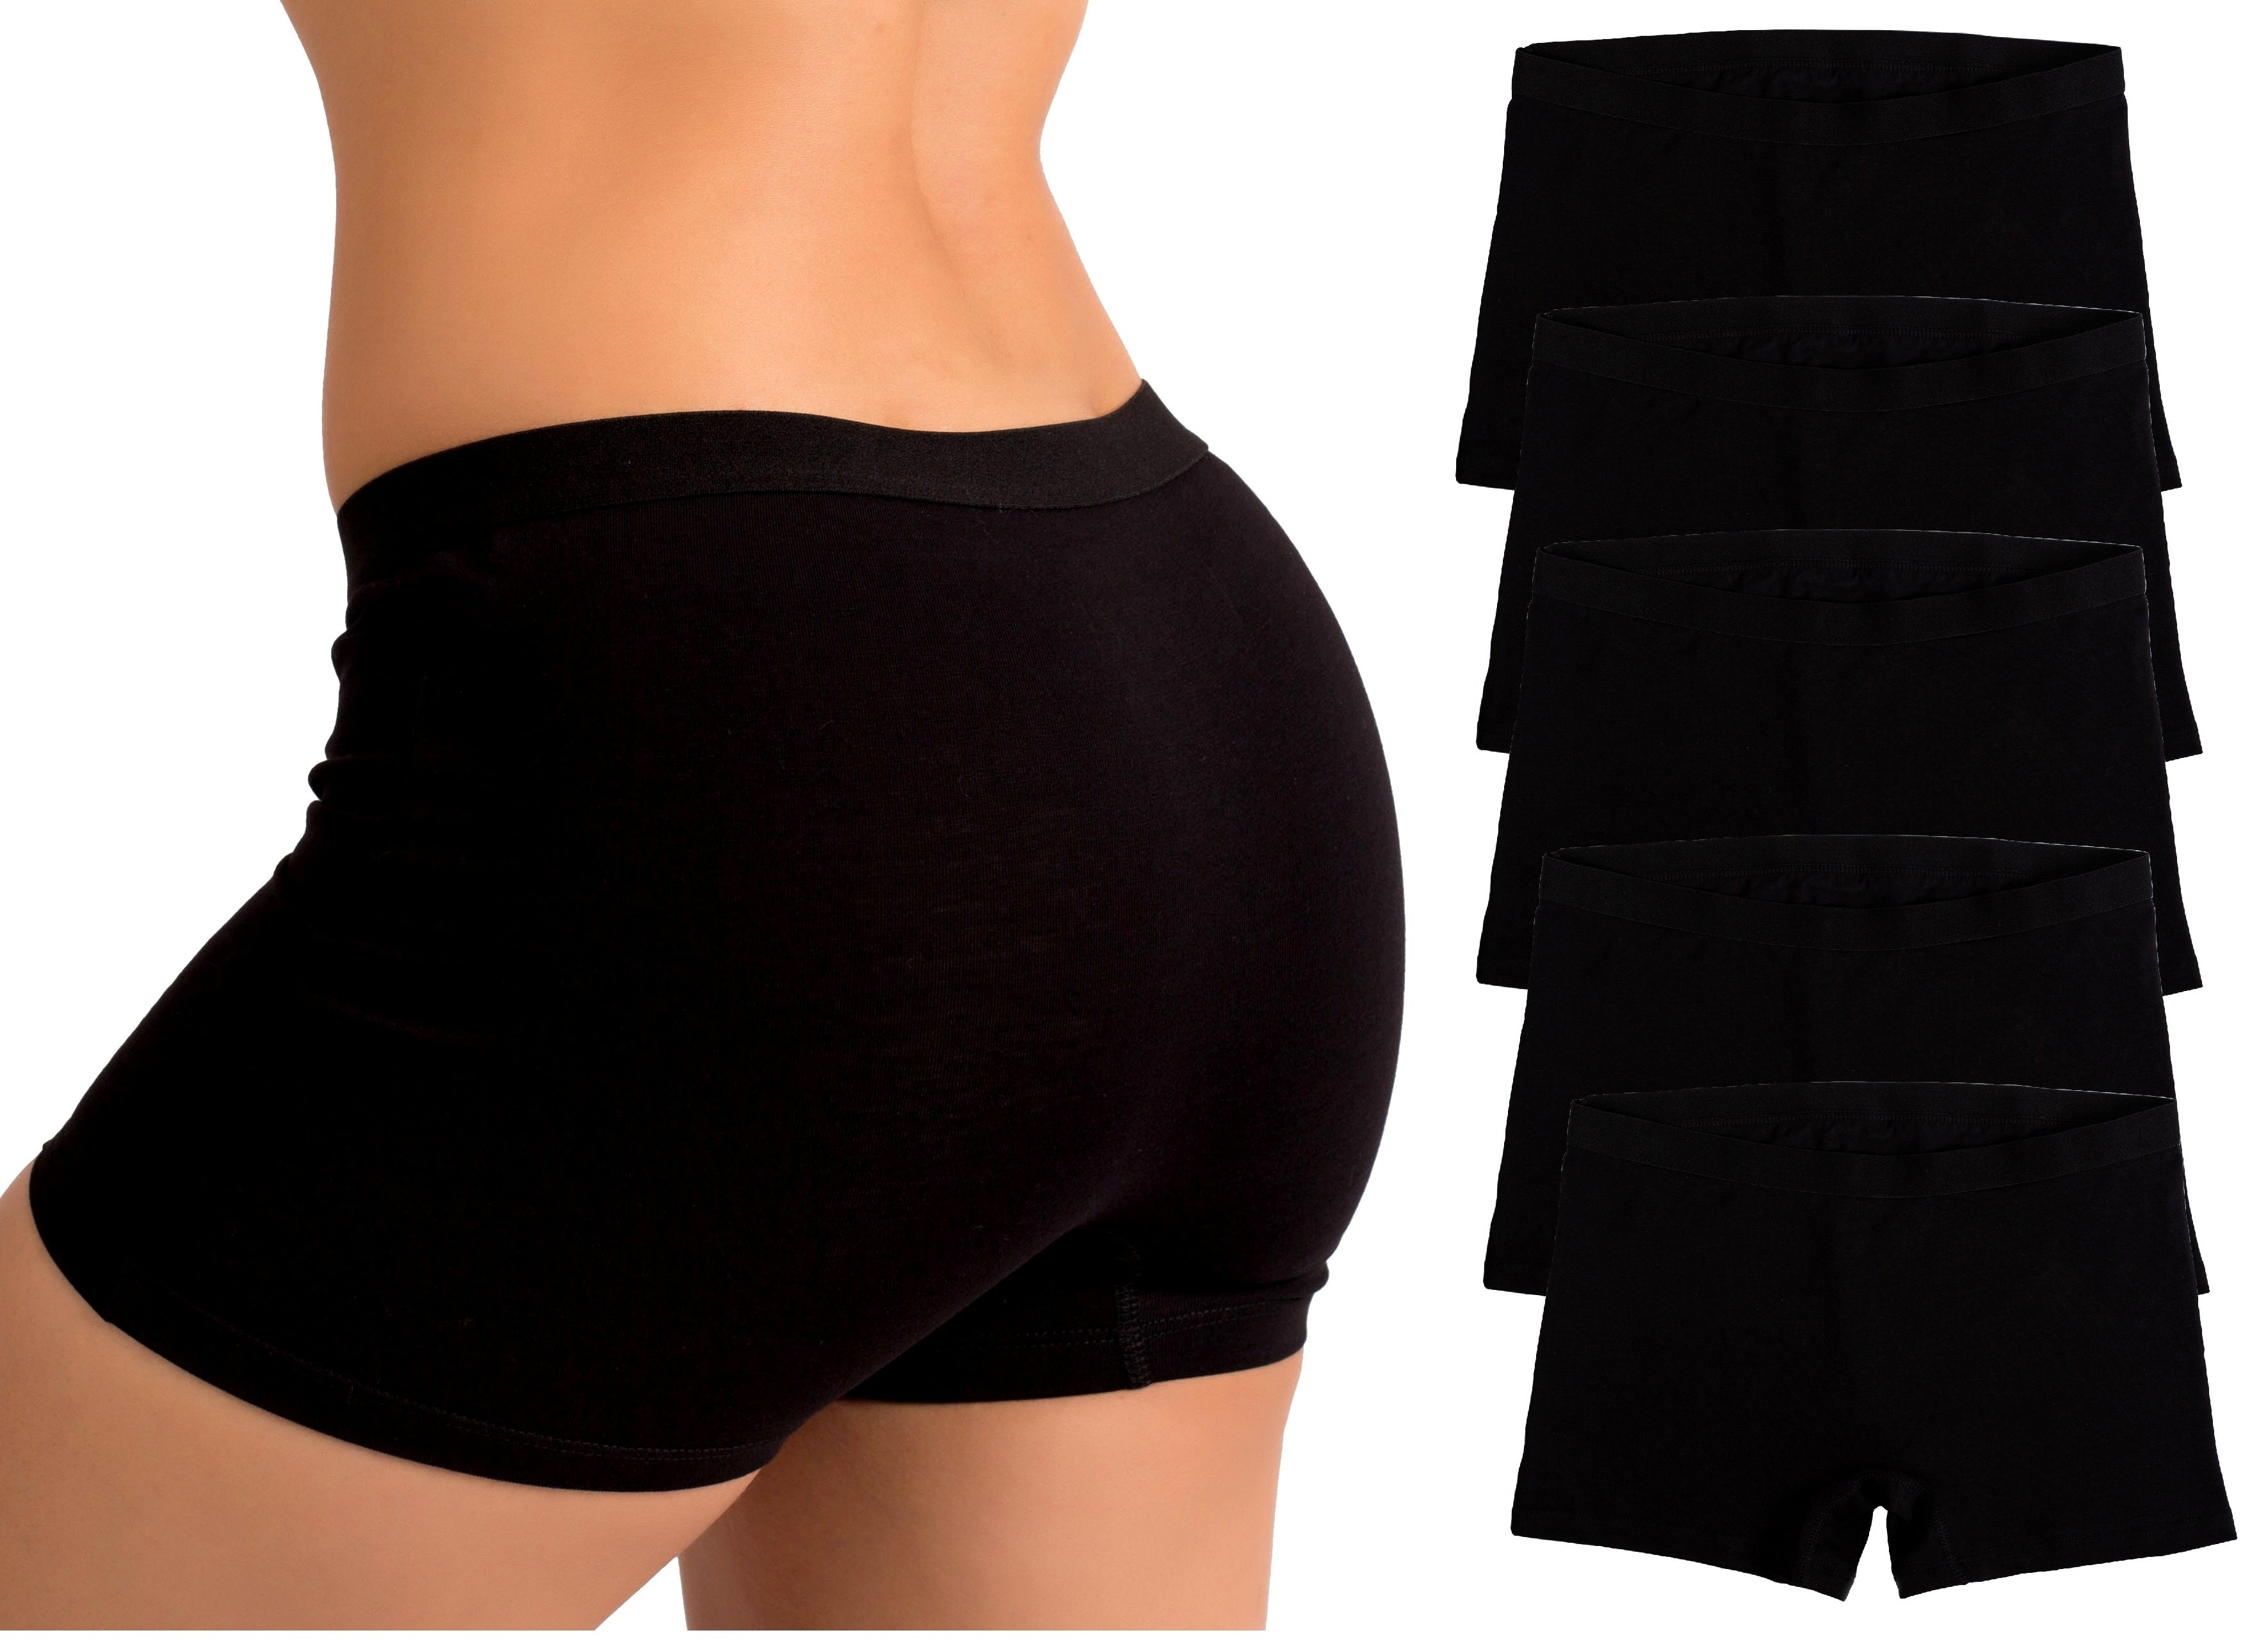   Essentials Women's Cotton Boyshort Underwear (Available  in Plus Size), Pack of 5, Black, XX-Small : Clothing, Shoes & Jewelry